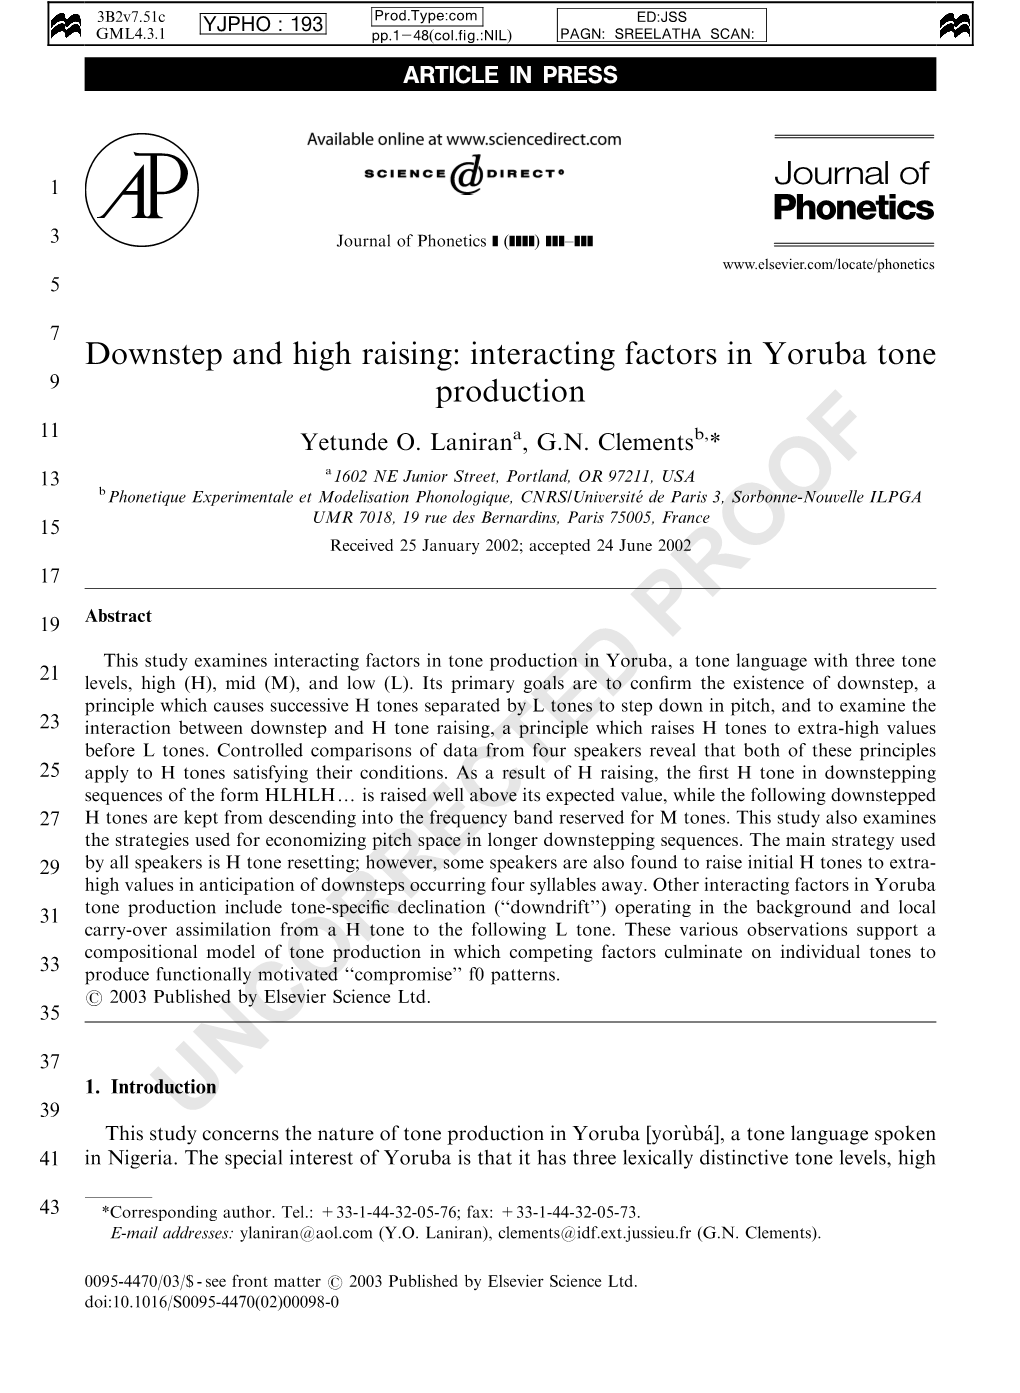 Laniran and Clements (1995) Have Reported Look-Ahead Effects in Yoruba Tone Production, Though Not of the Magnitude and Consistency of Those Which Stewart Reported